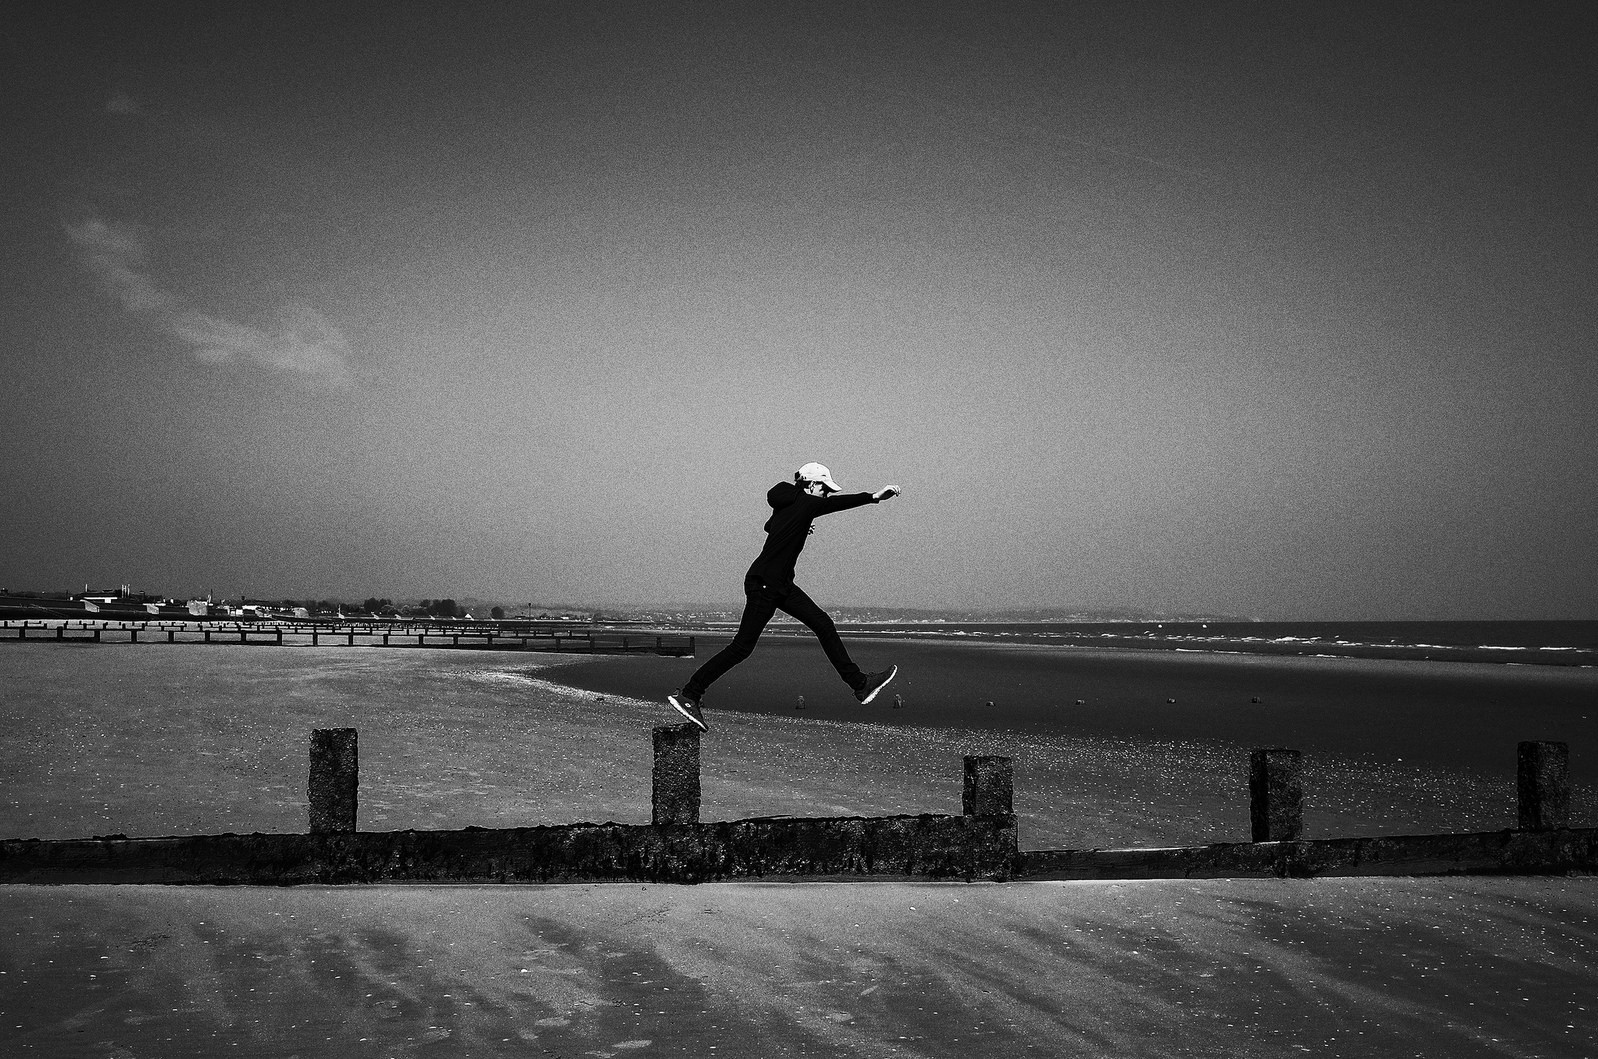 A man jumps along a pier on the shore